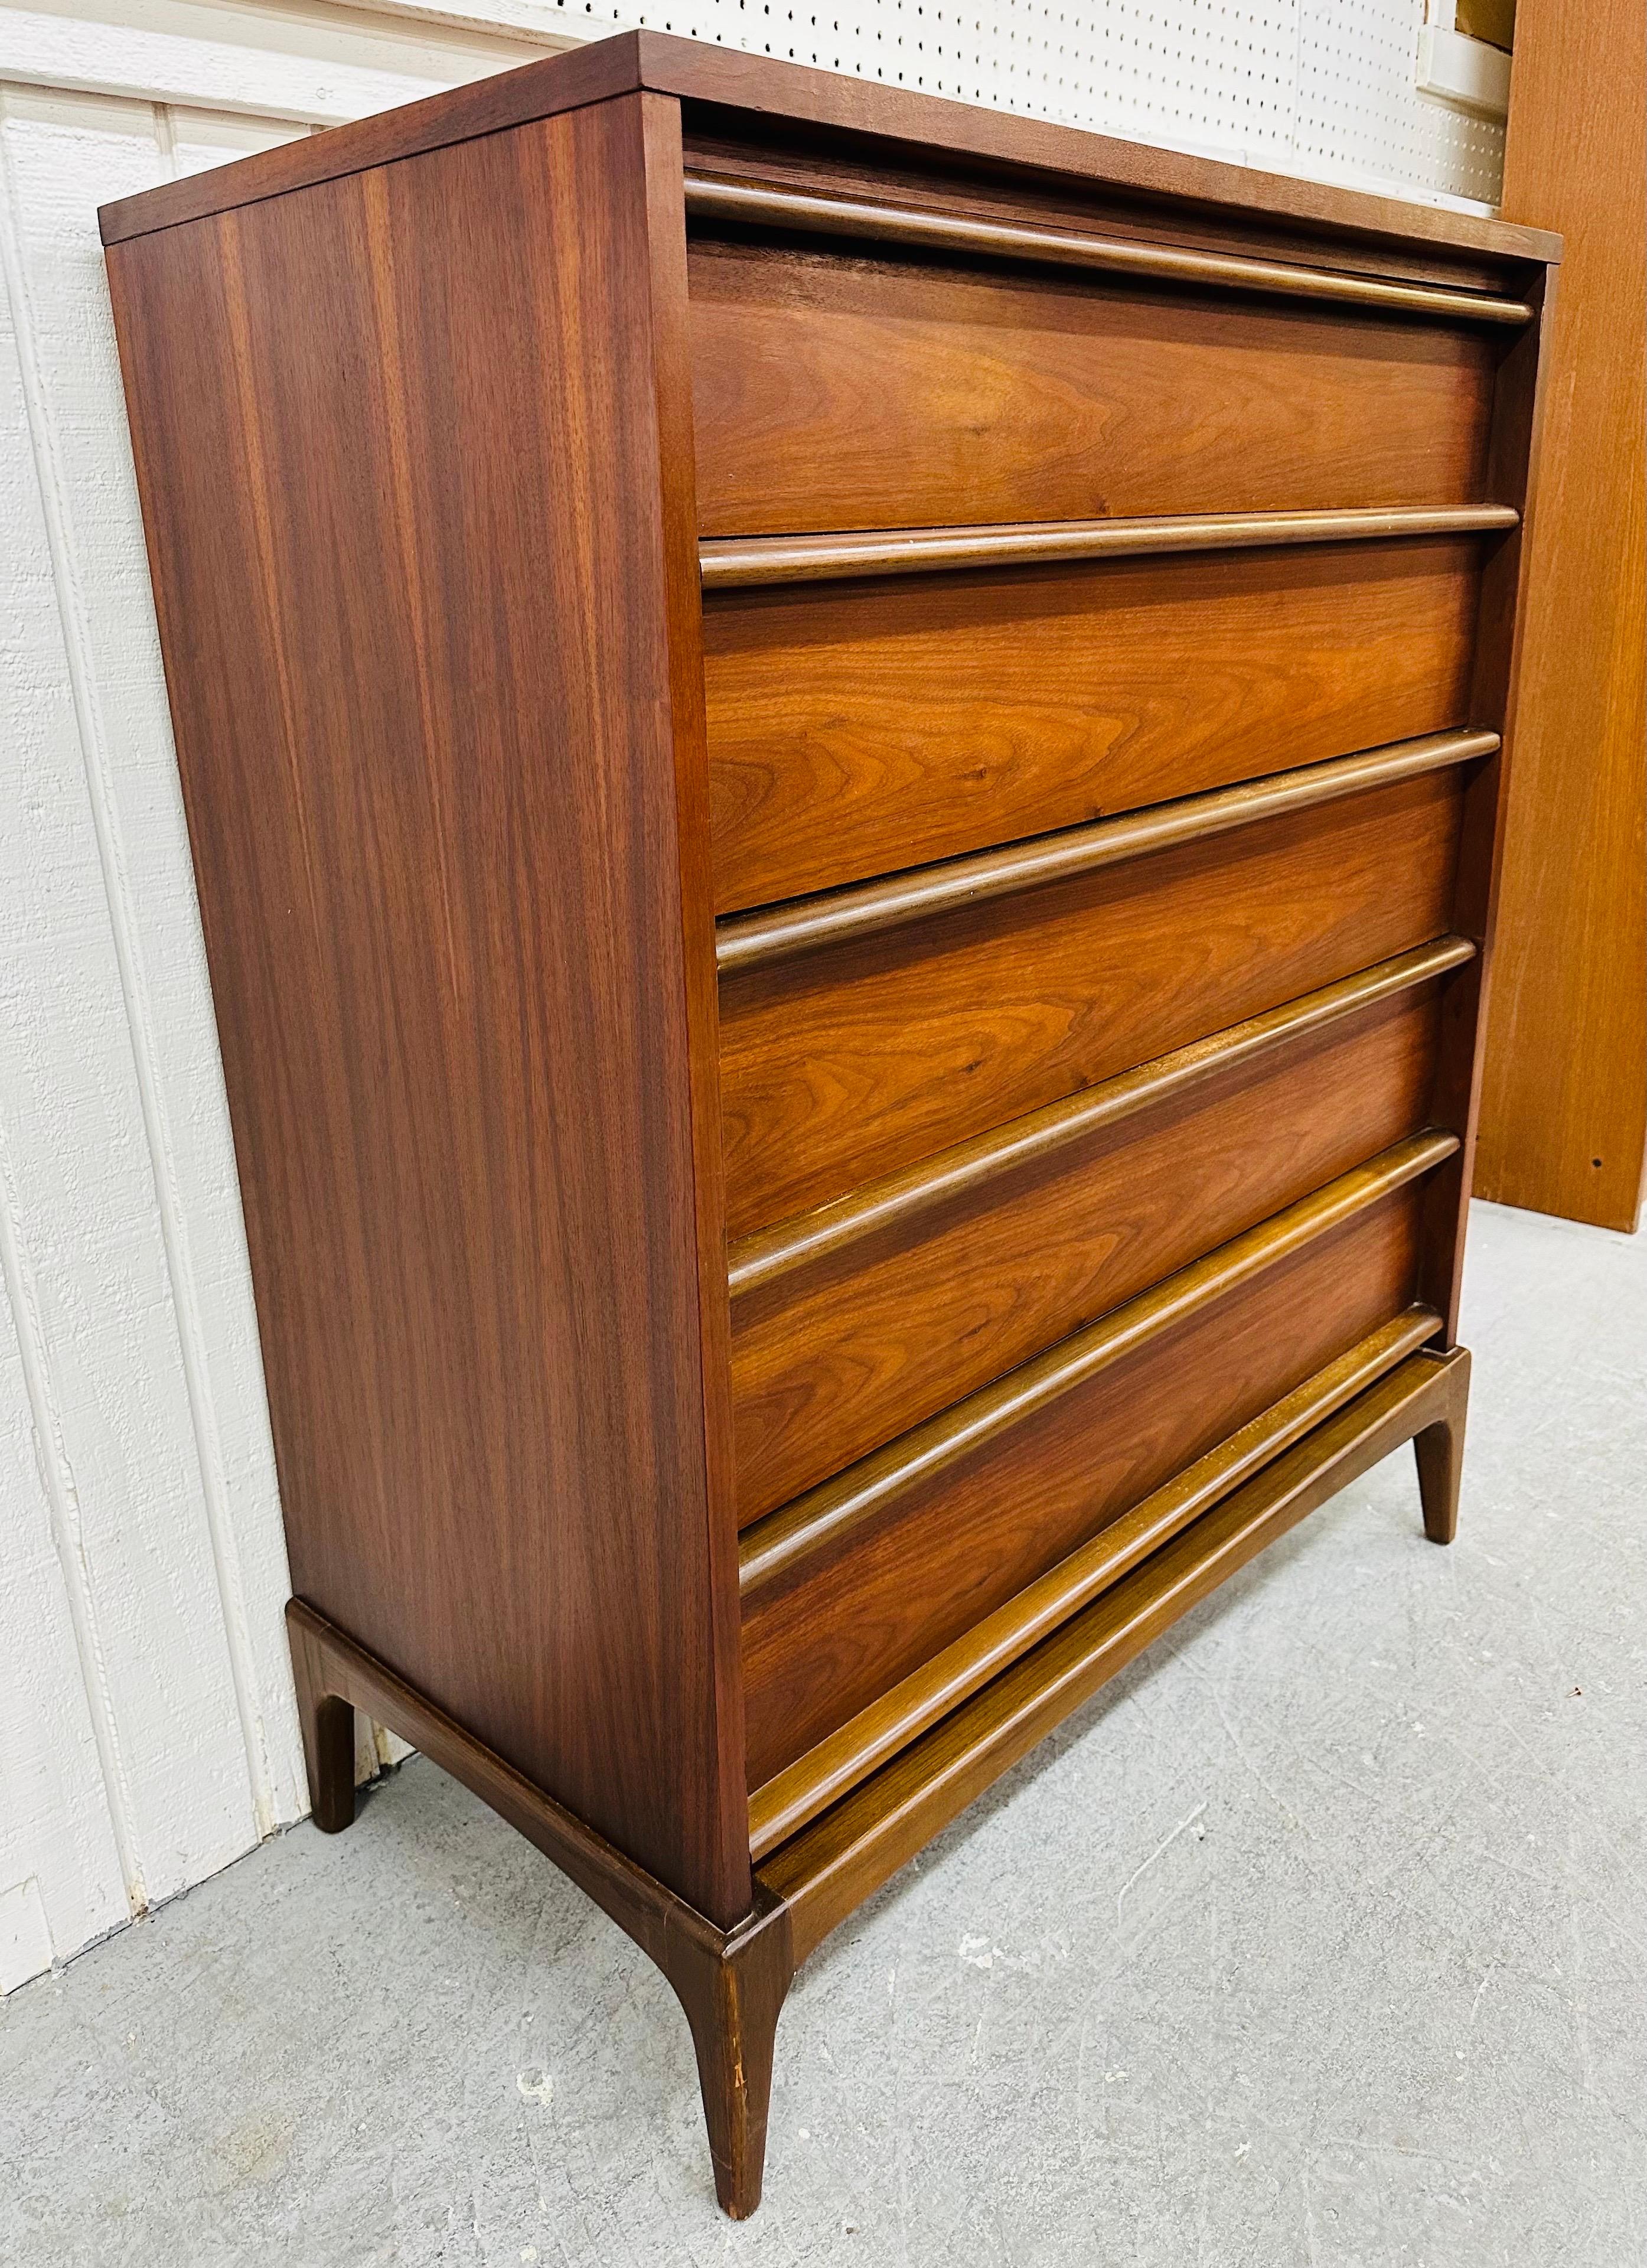 This listing is for a Mid-Century Modern Lane Rhythm Walnut High Chest. Featuring a straight line design, five drawers with wooden pulls, modern legs, and a beautiful walnut finish! This is an exceptional combination of quality and design!